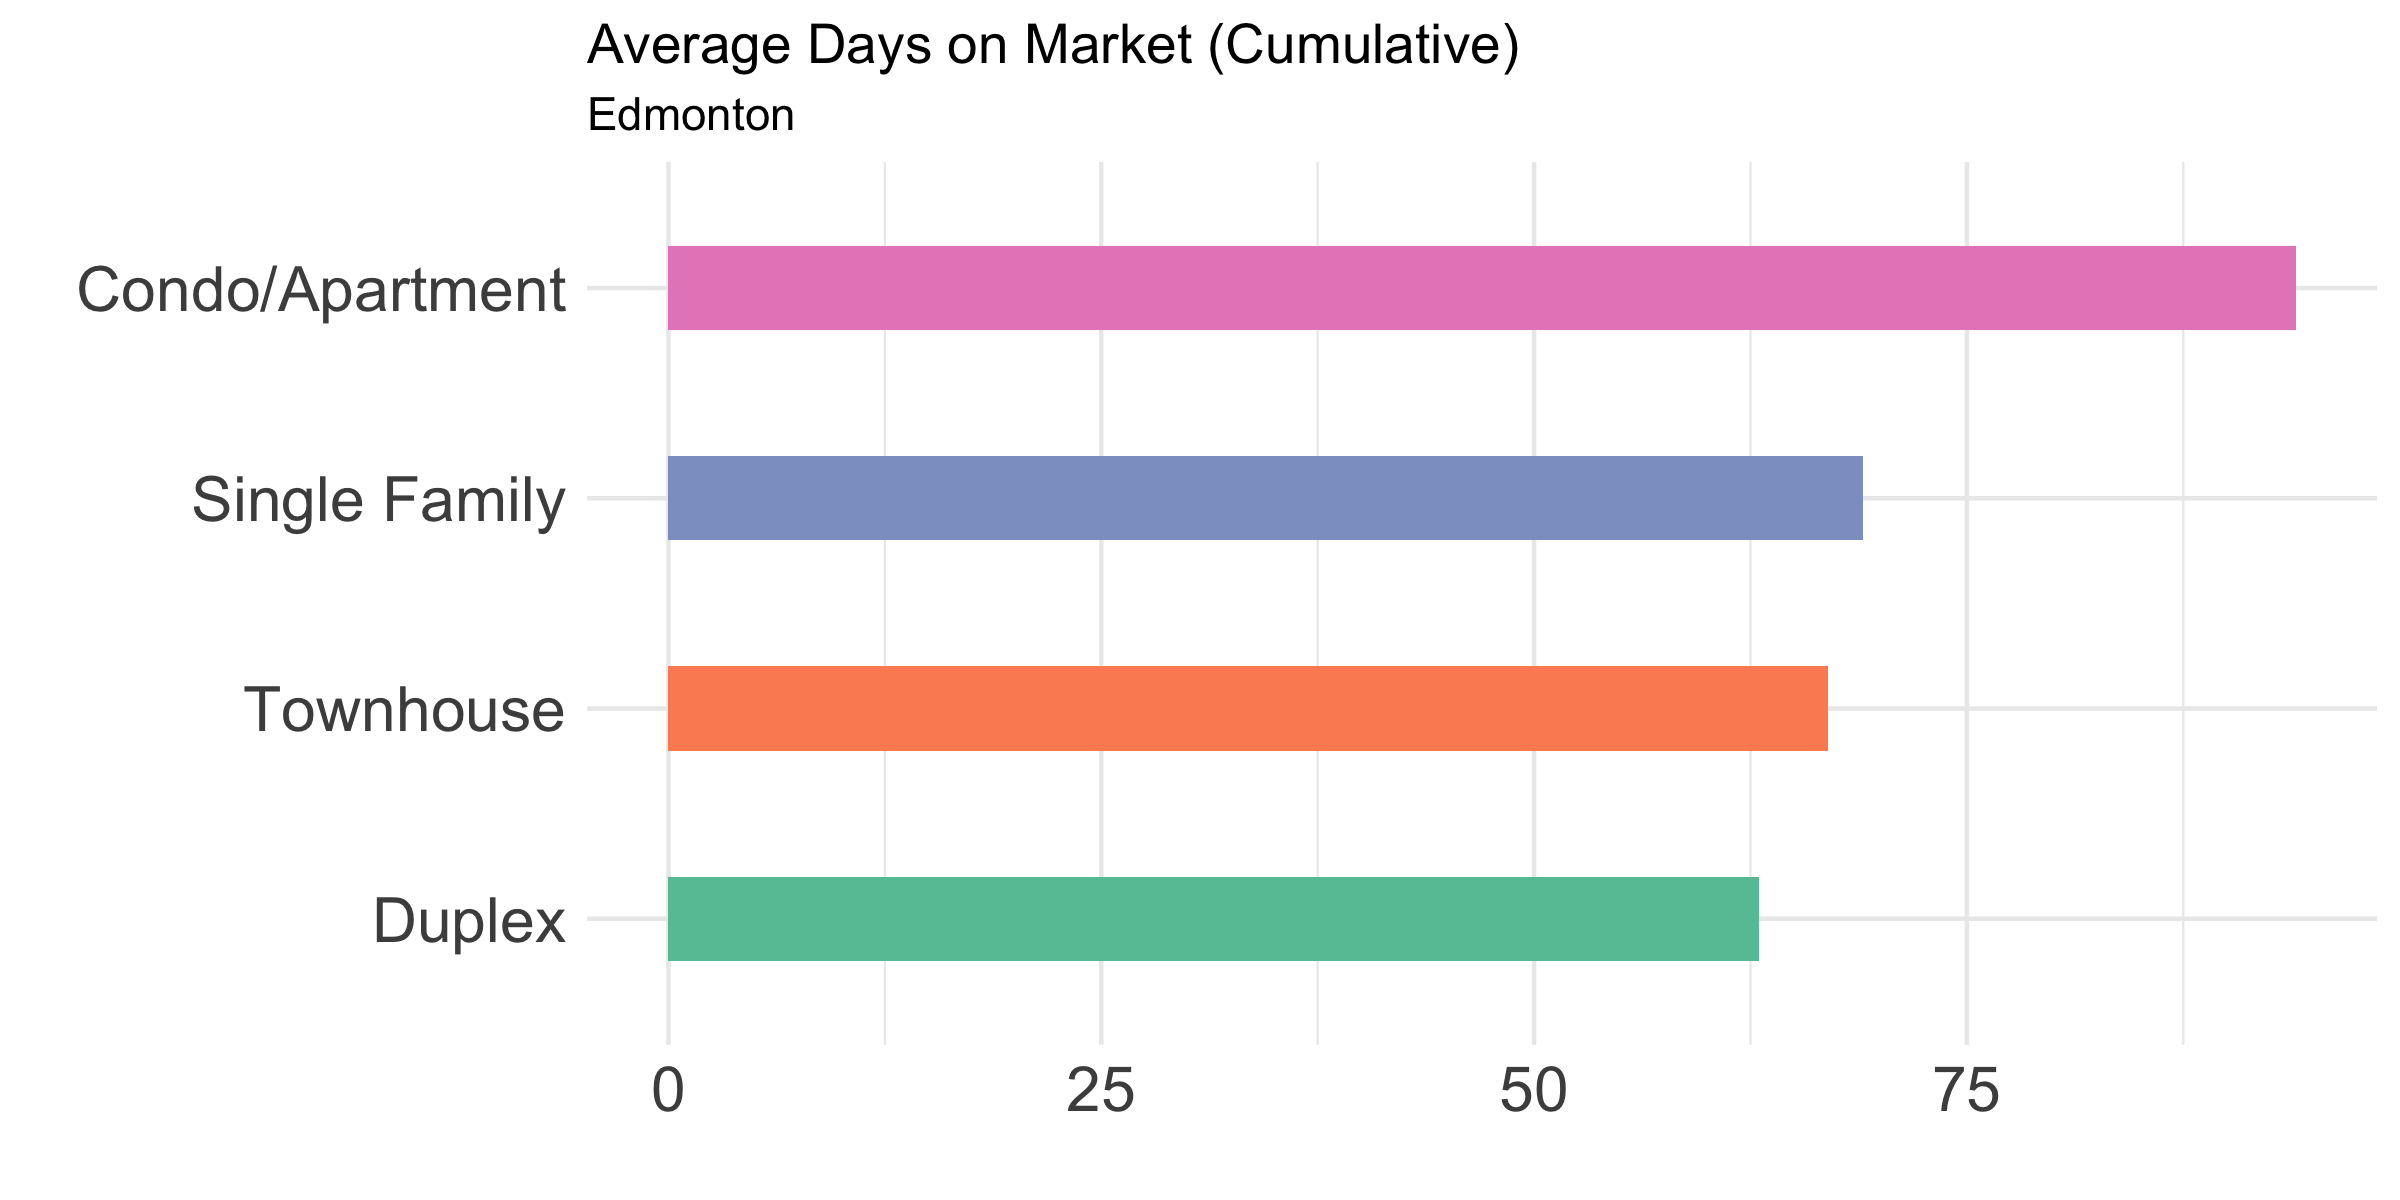 Bar graph showing average days different types of properties spend before selling